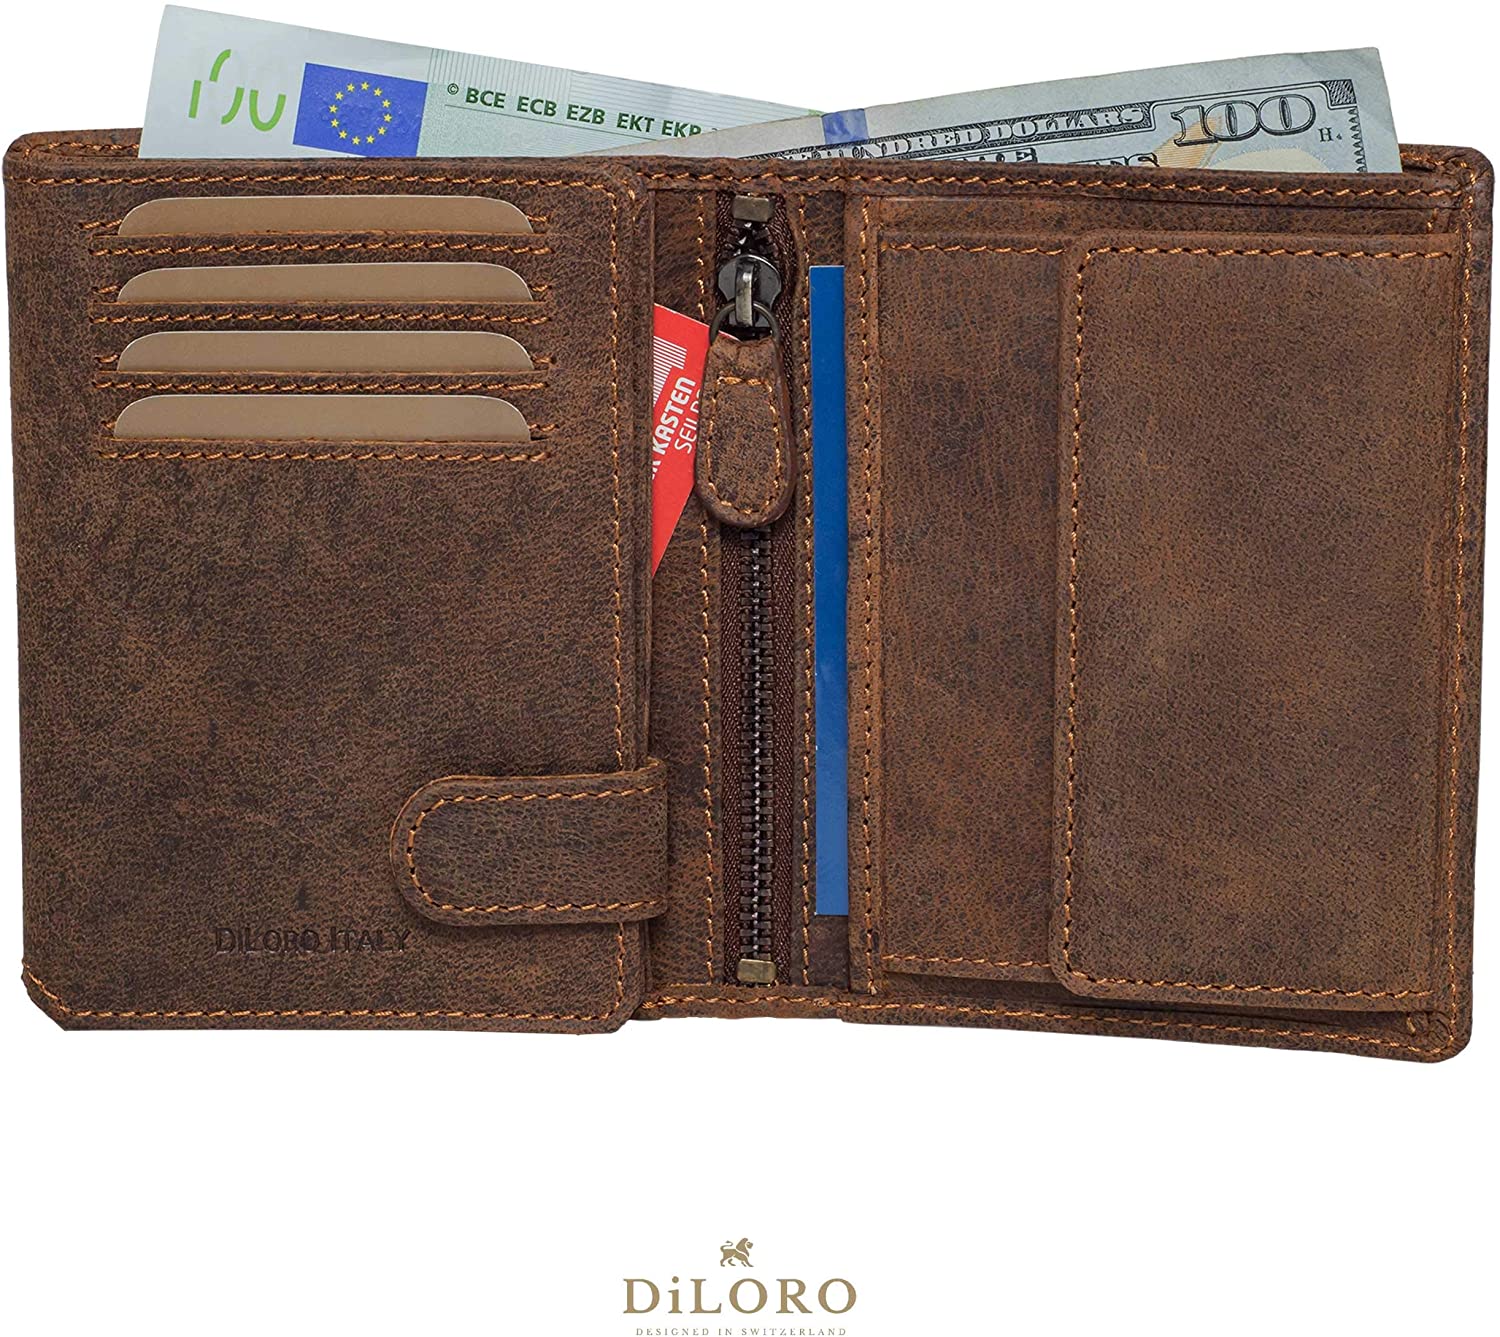 DiLoro Men's Large Leather Bifold Wallet